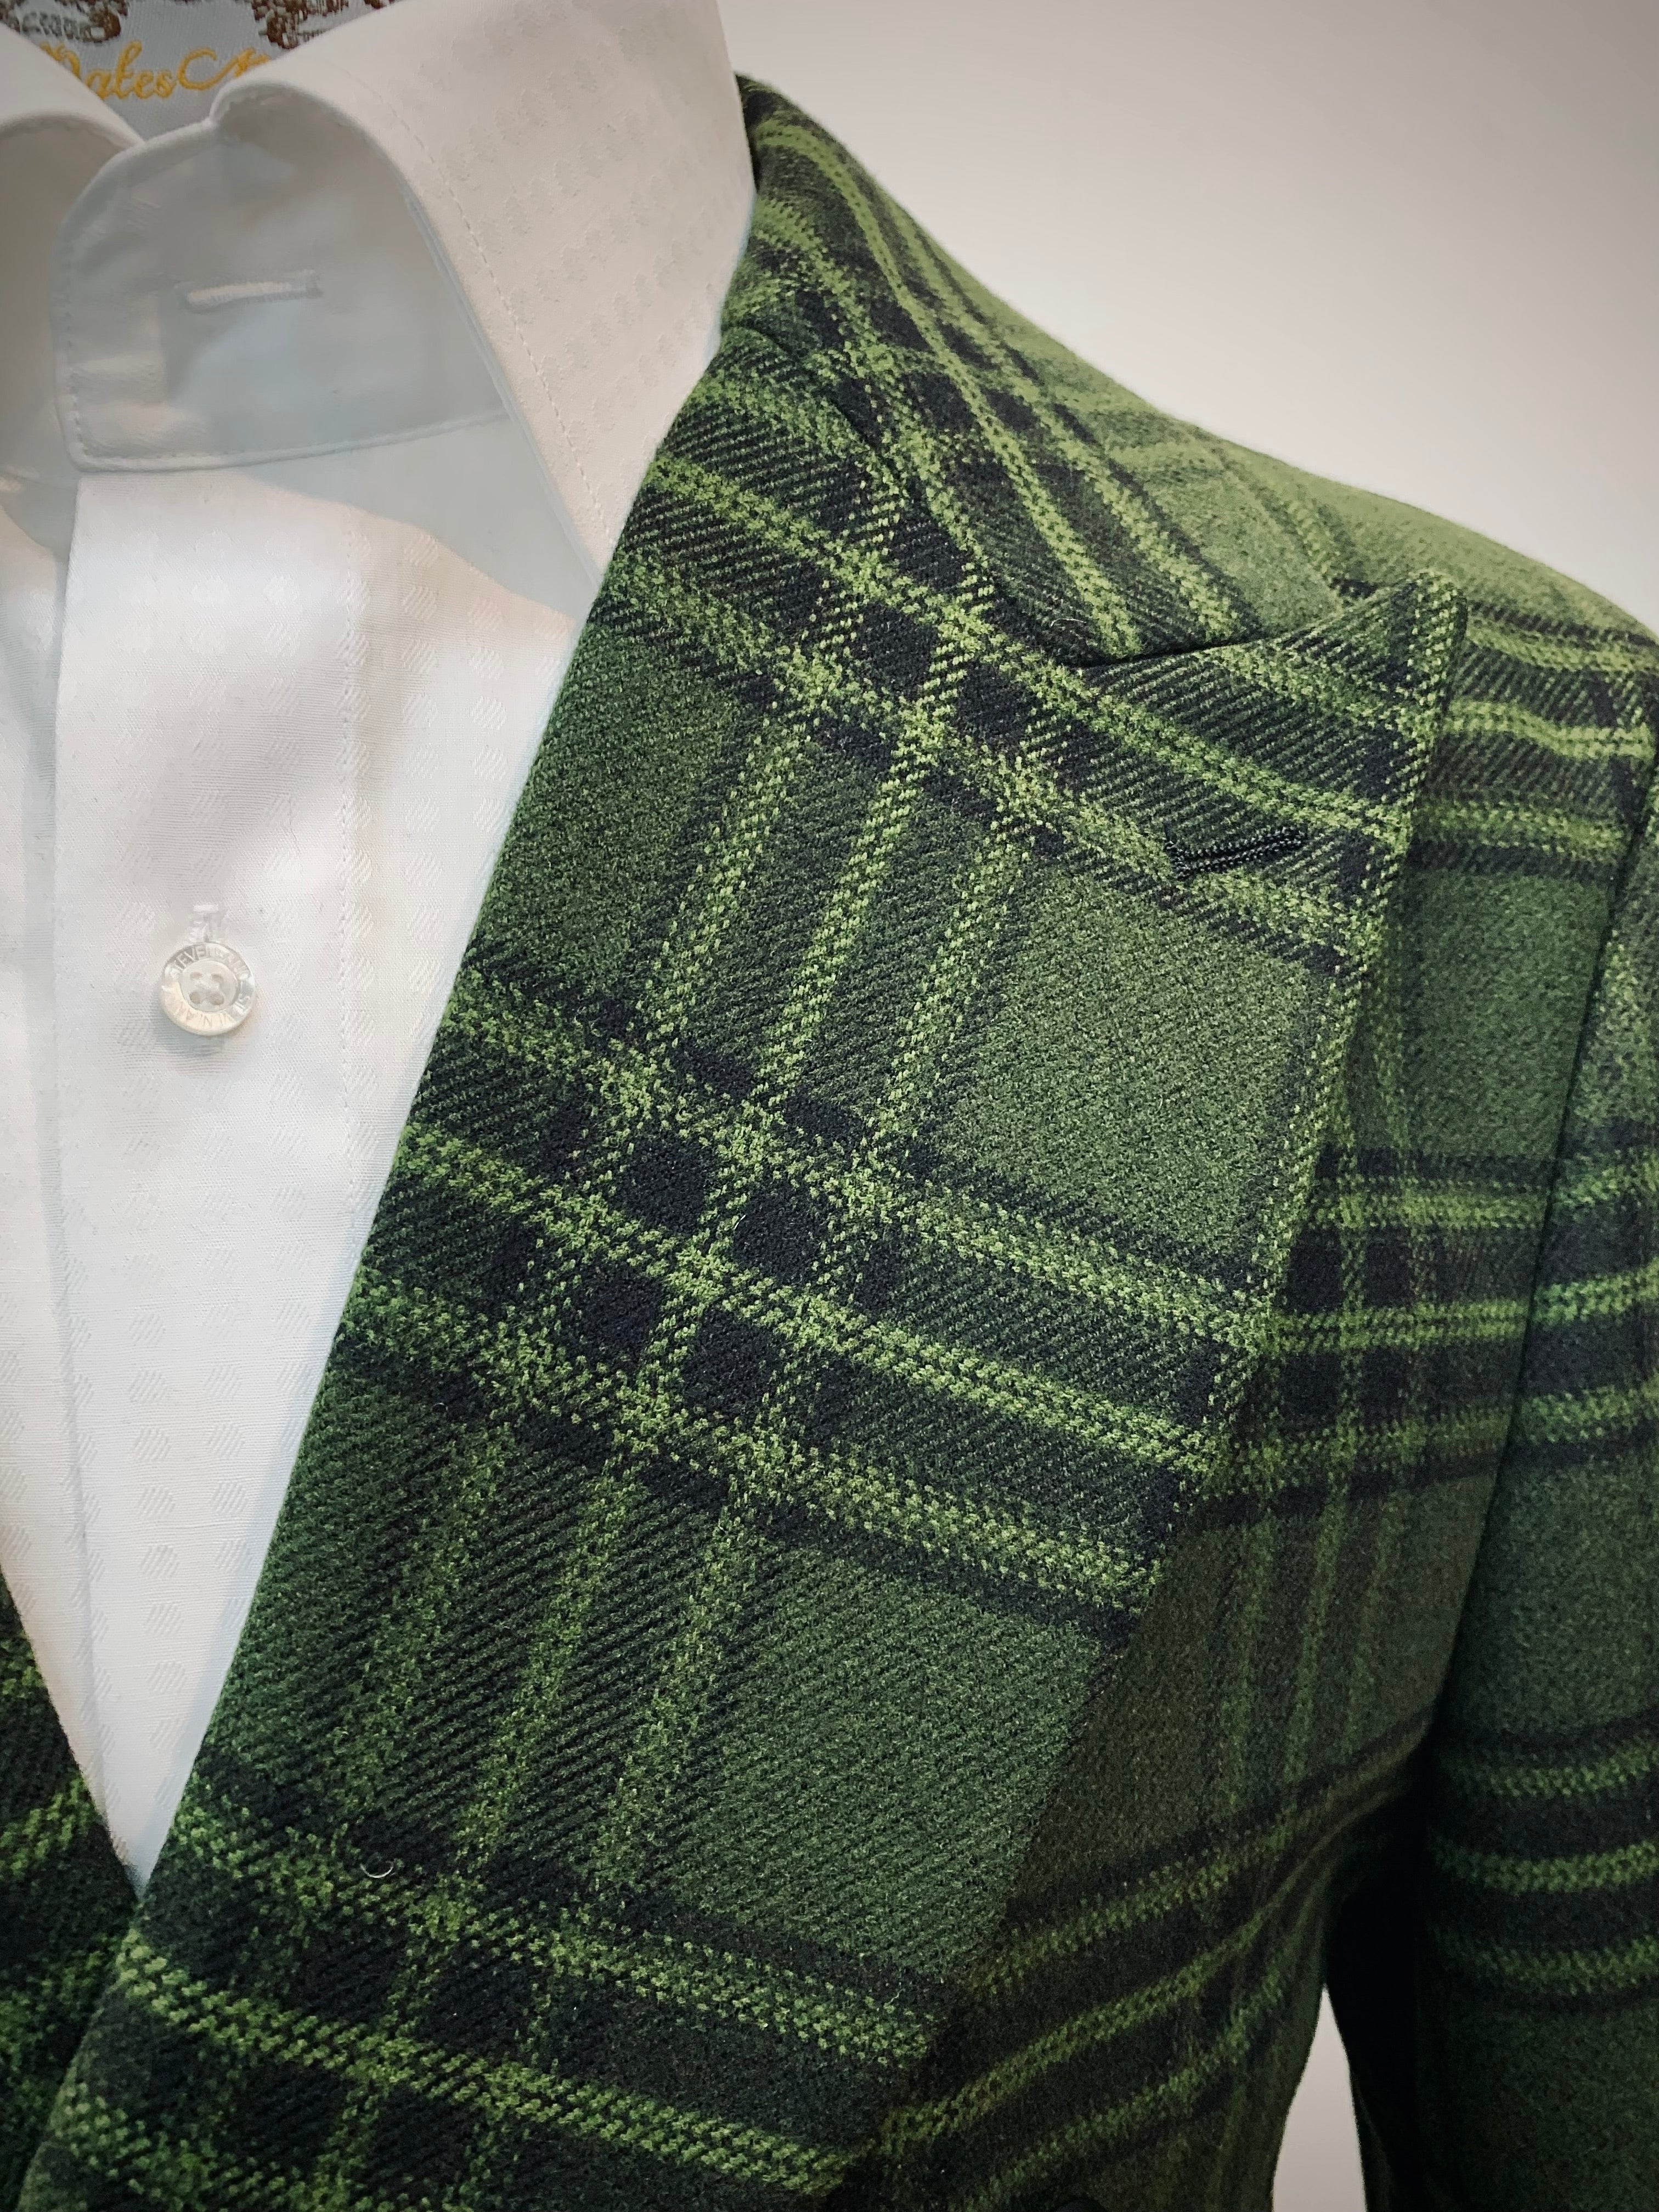 Green/Black Plaid Double Breasted Topcoat